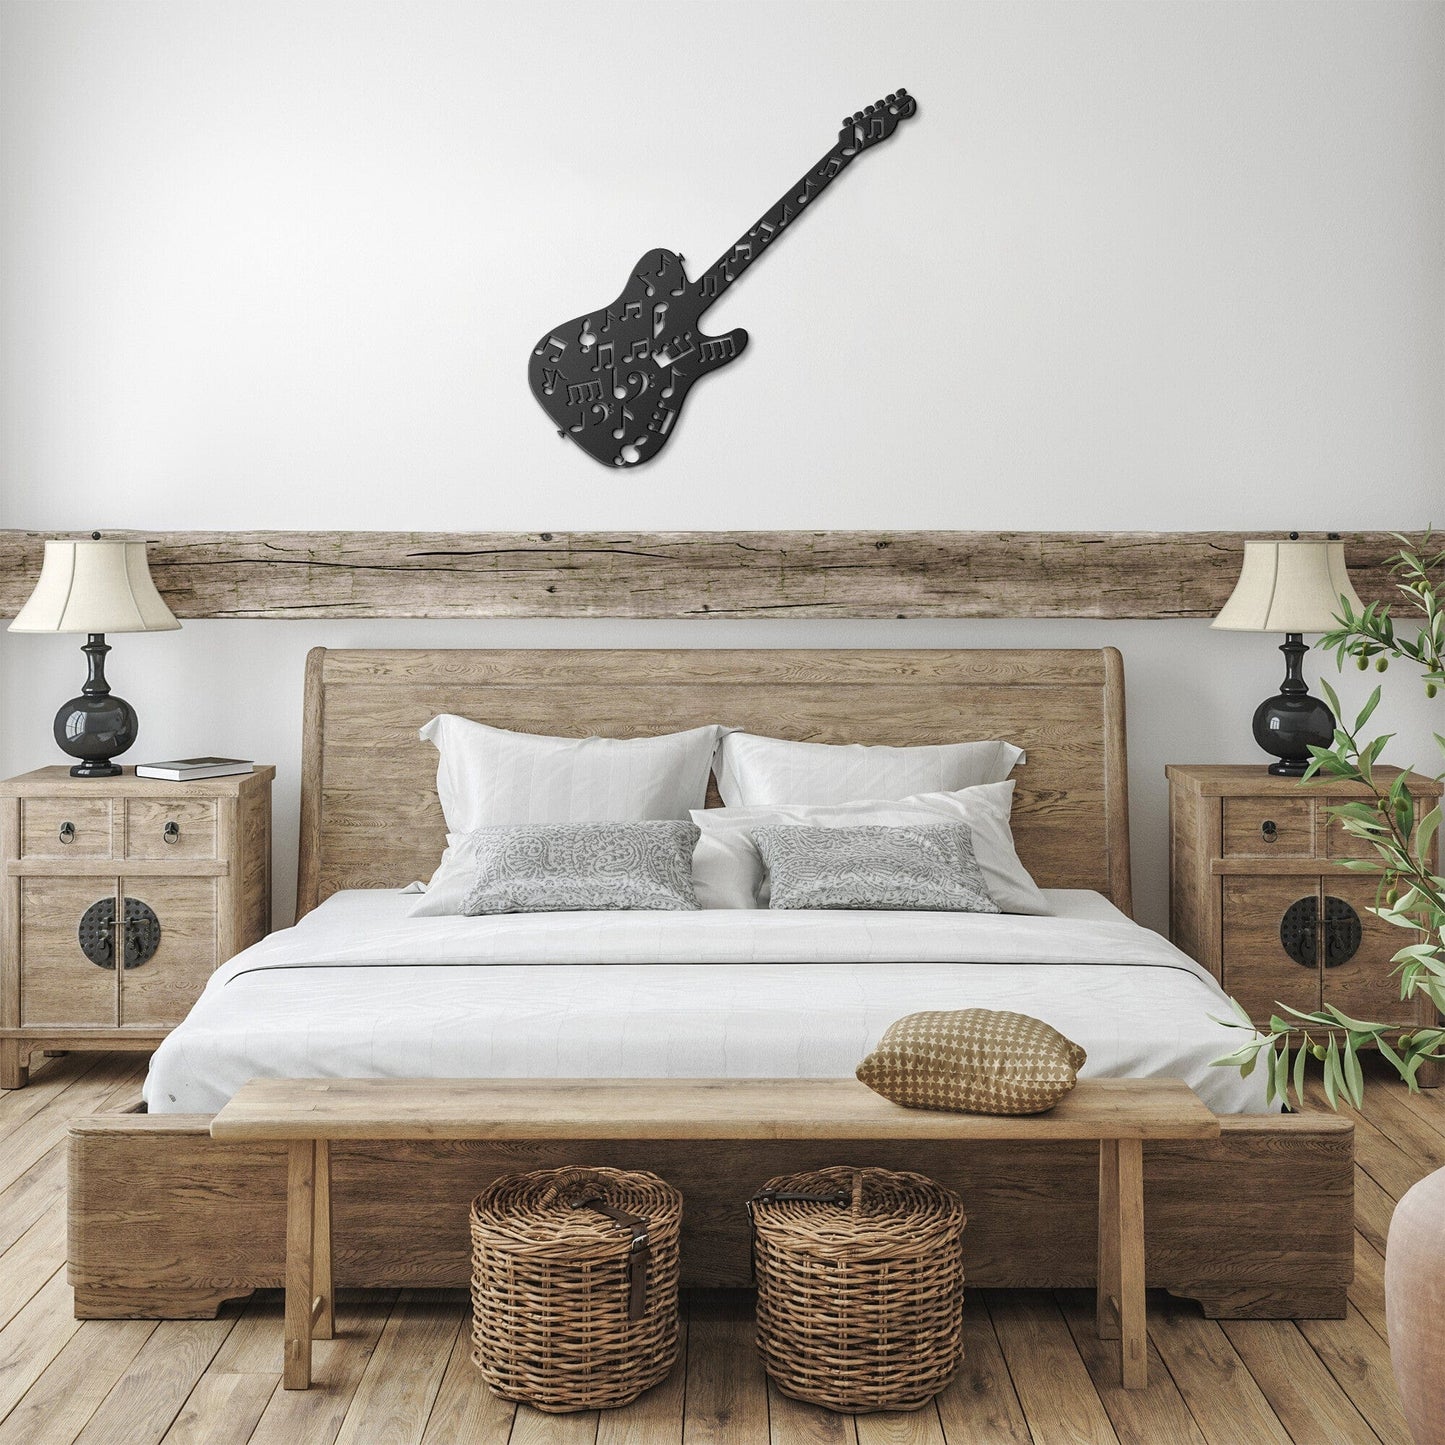 Guitar with Music notes Metal Wall Art